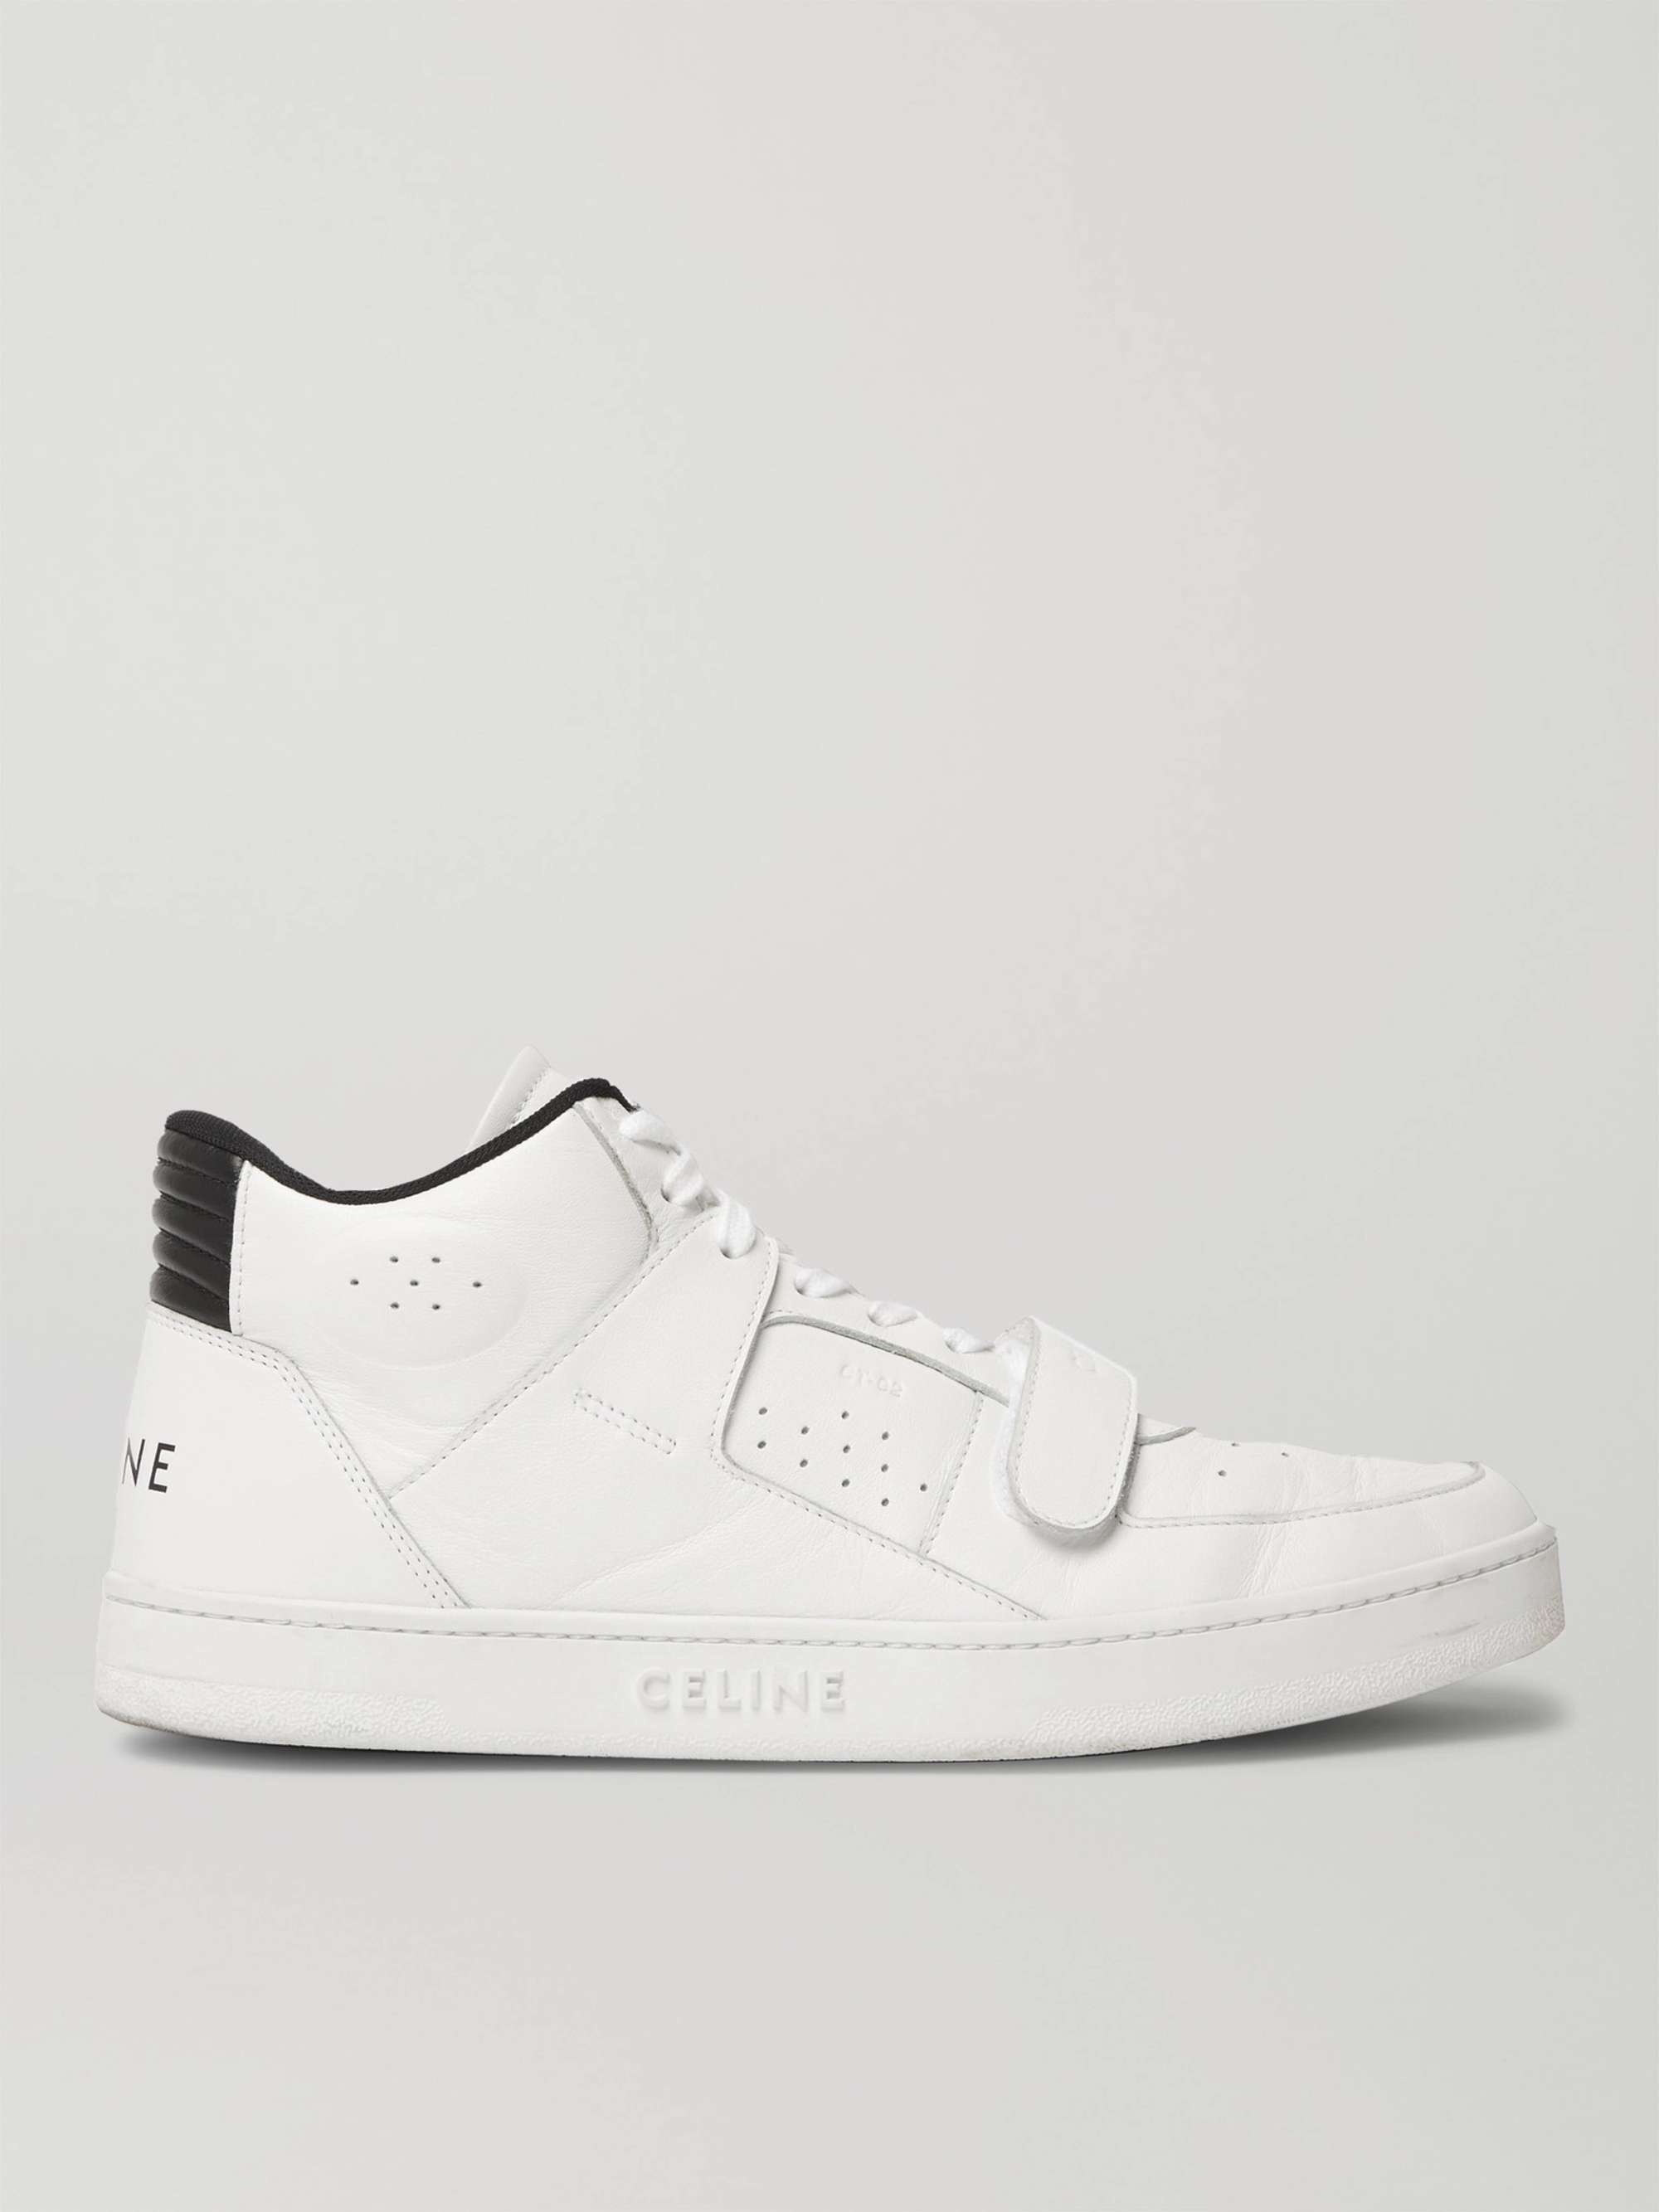 White CT-02 Leather High-Top Sneakers | CELINE HOMME | MR PORTER